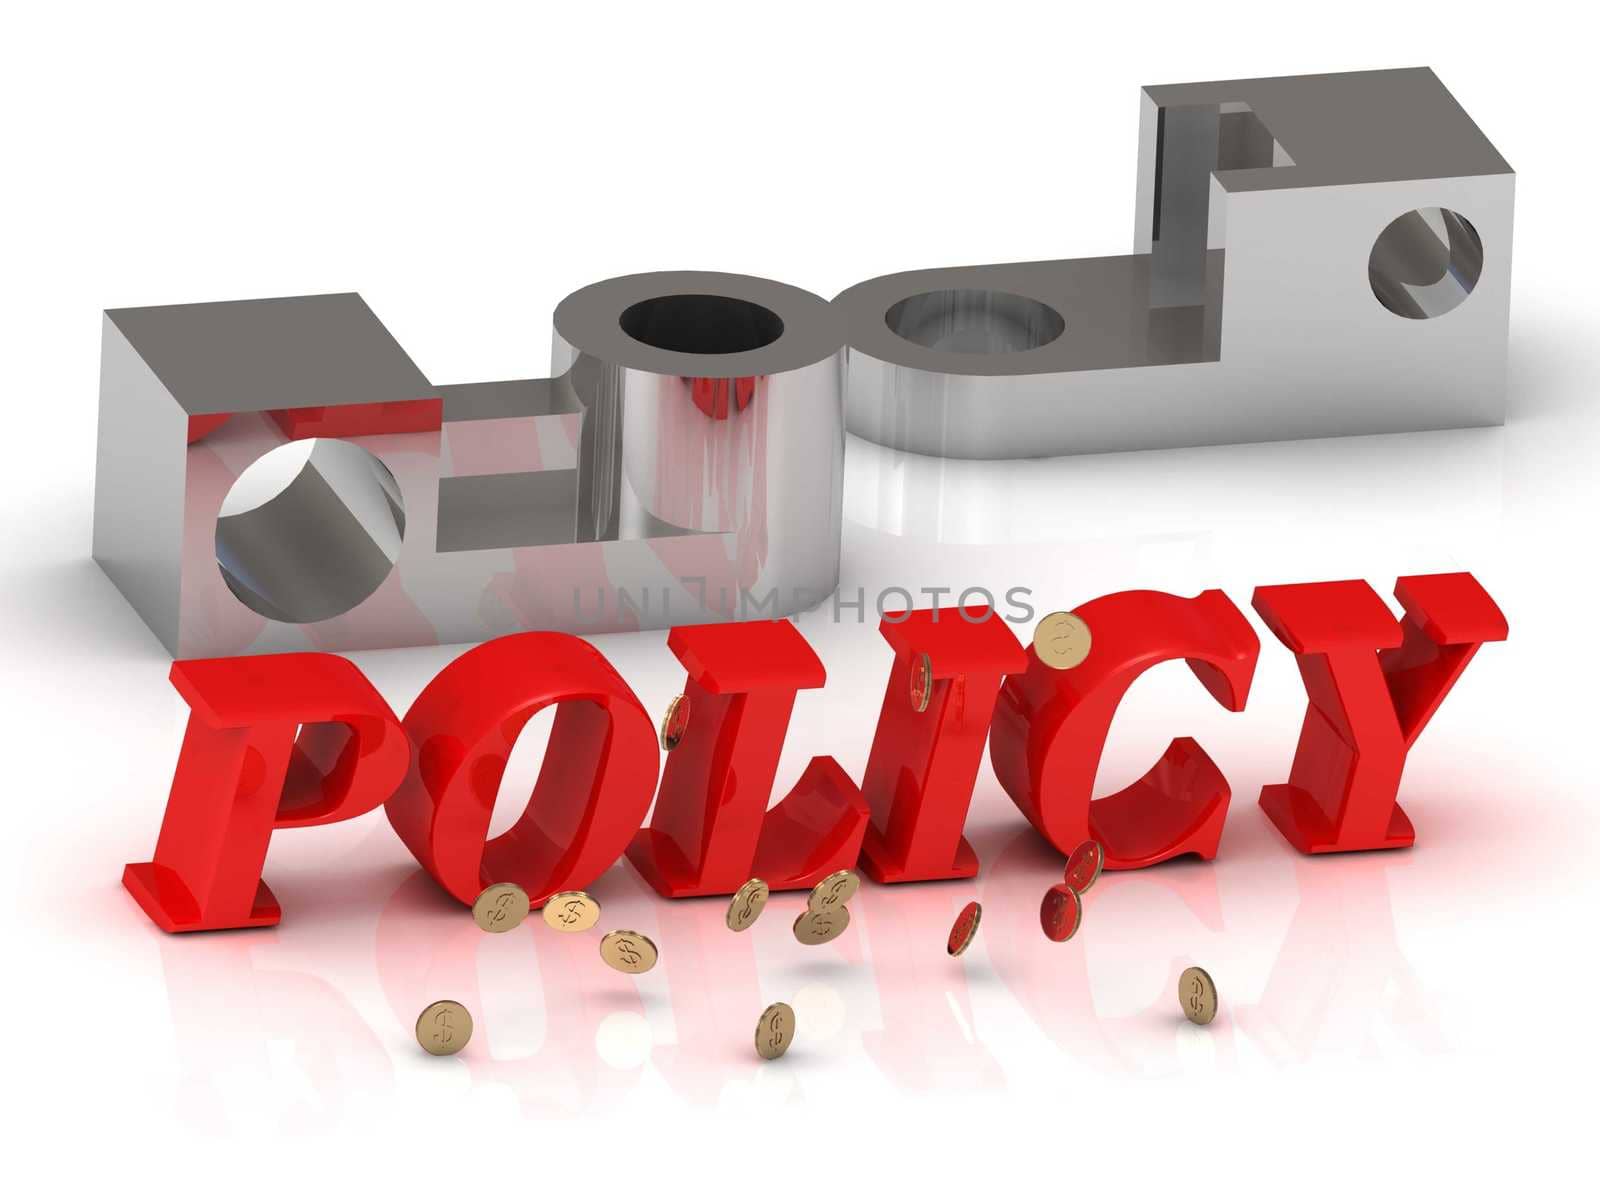 POLICY- inscription of red letters and silver details on white background